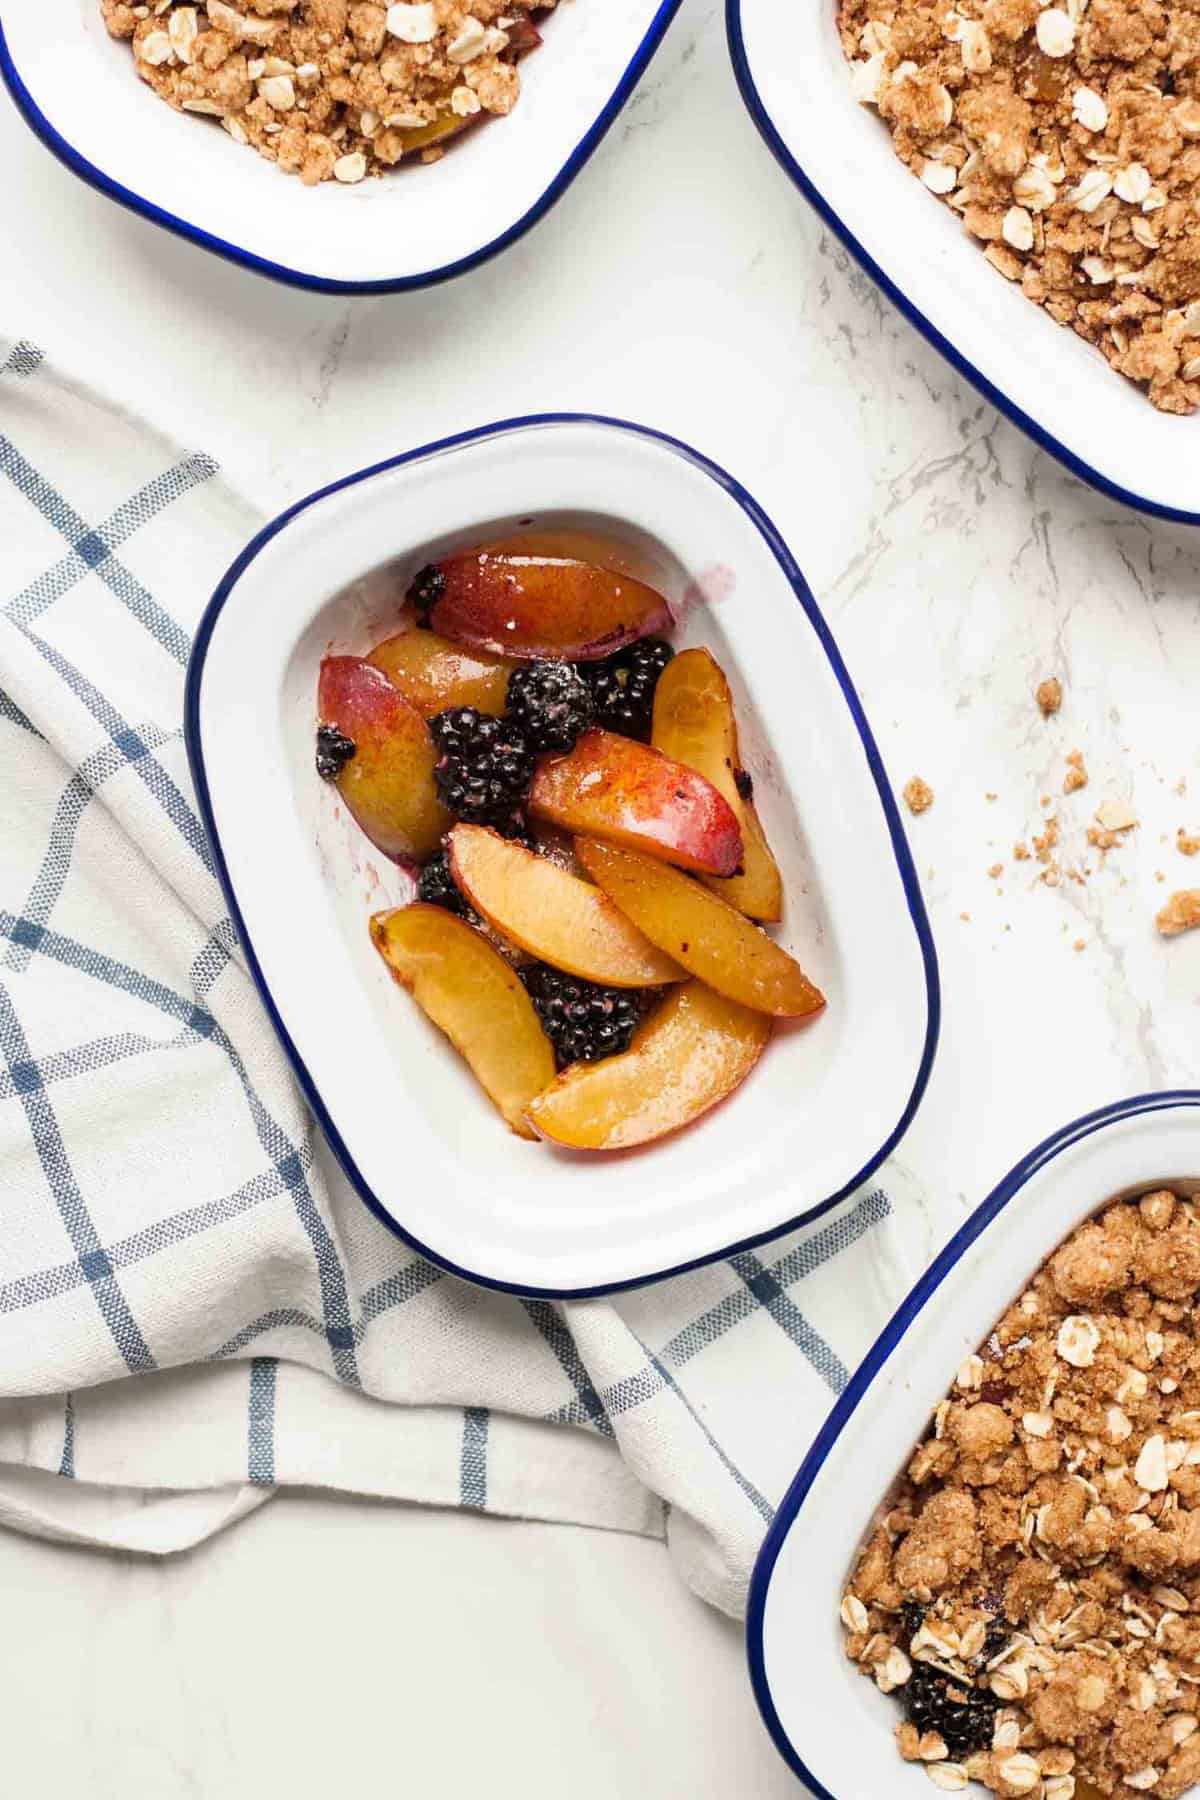 A pie dish with plums and blackberries without a crumble topping.